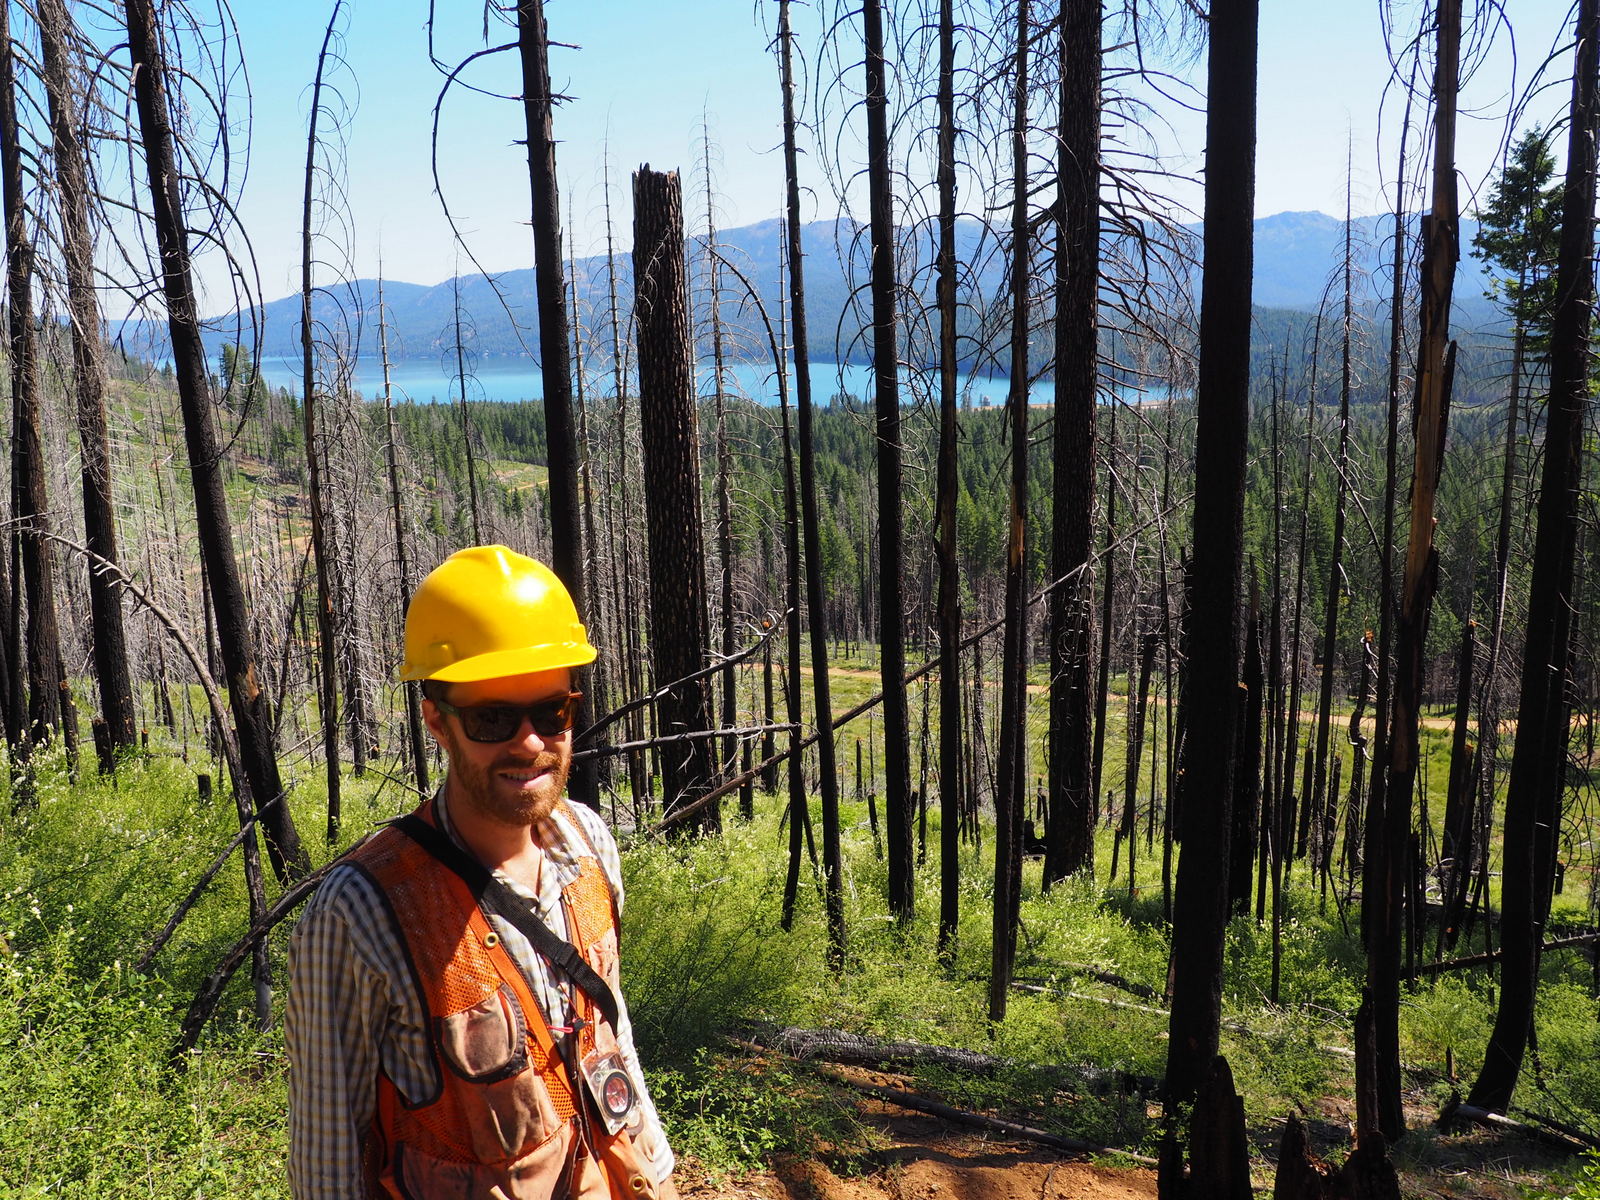 A man wearing a yellow hard-hat stands among the burned remains of forest trees, with green tree saplings growing.